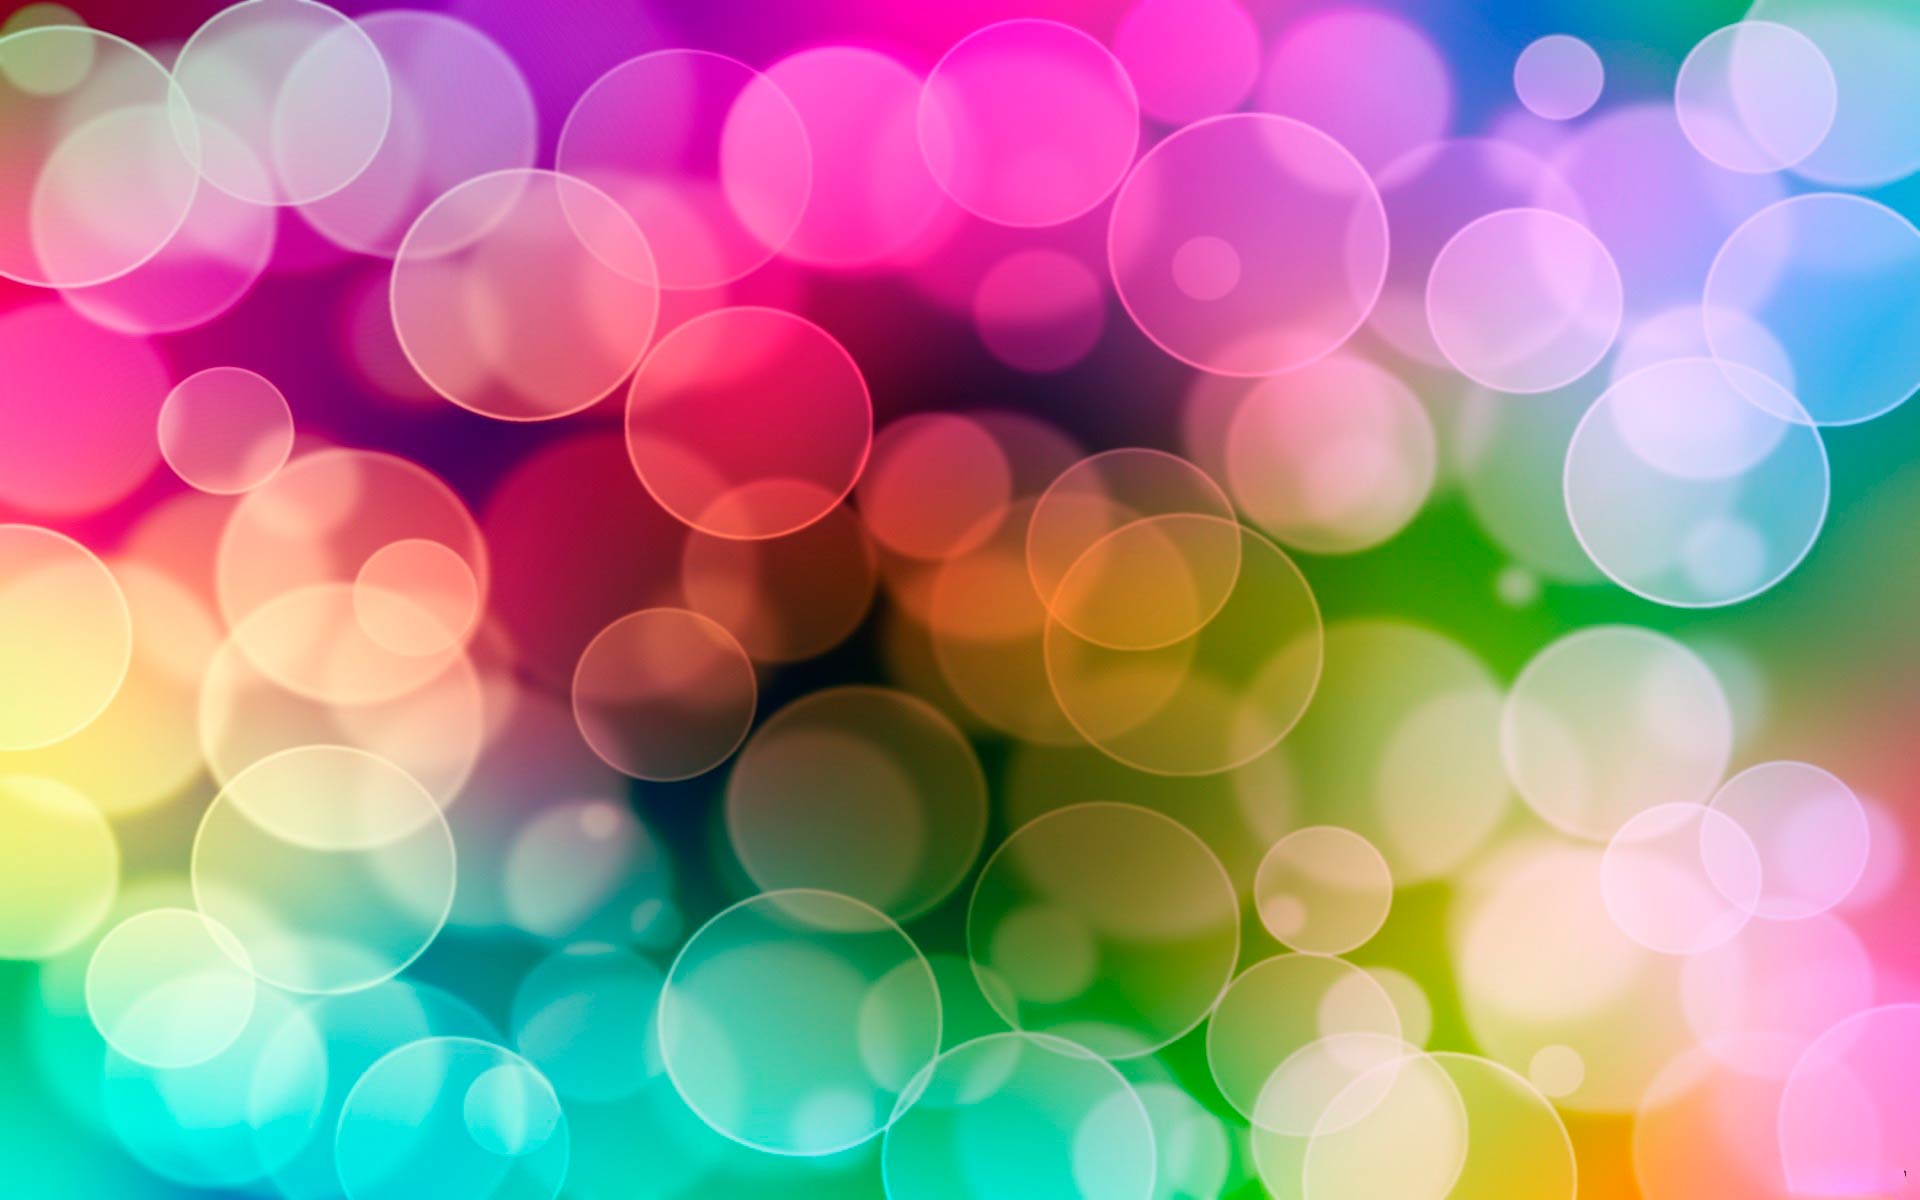 Colorful Abstract Wallpaper 1933 Hd Wallpapers in Abstract   Imagesci